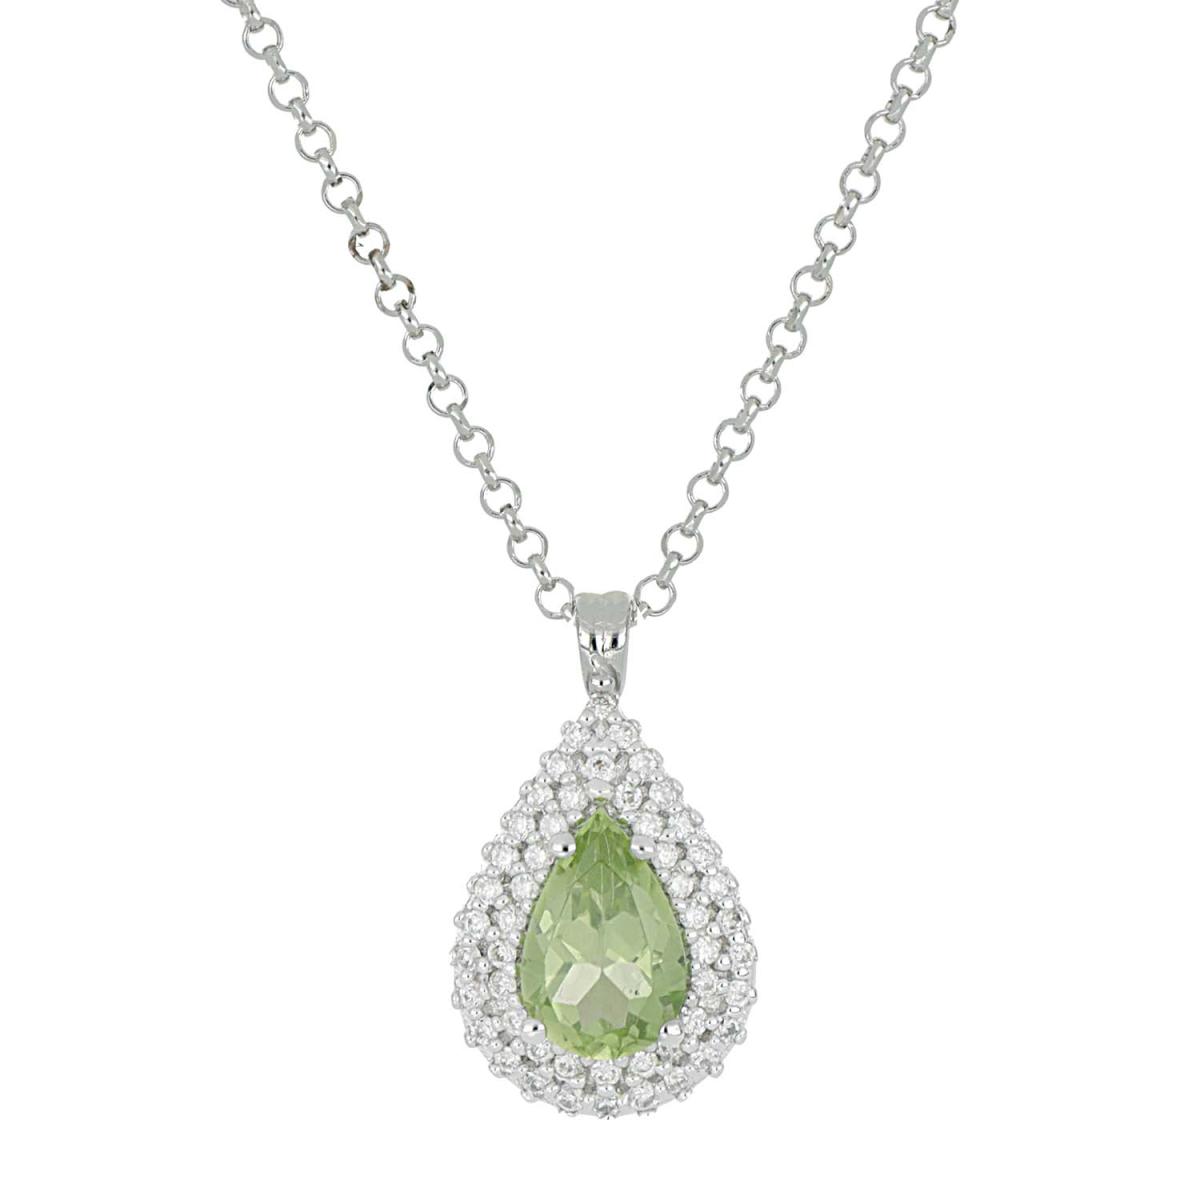 18kt white gold necklace with diamonds and central natural semi-precious stone - CD439/